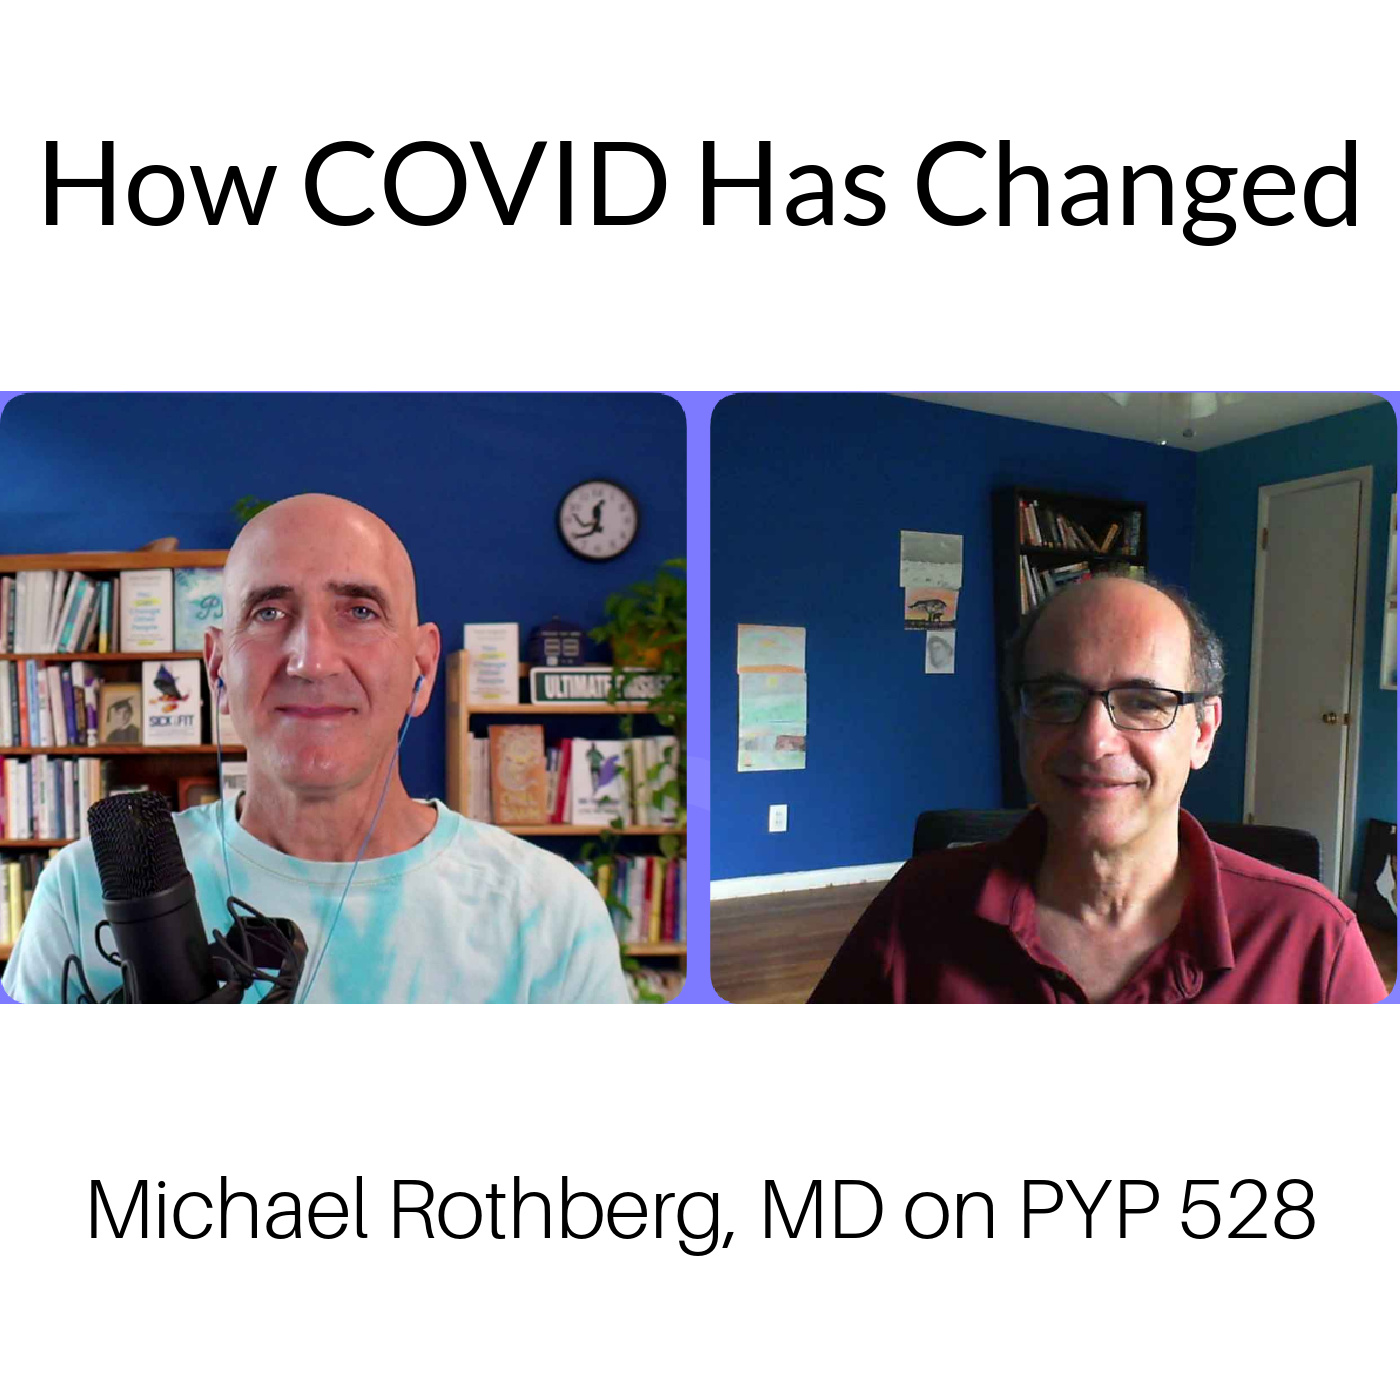 How COVID Has Changed: Michael Rothberg, MD, on PYP 528